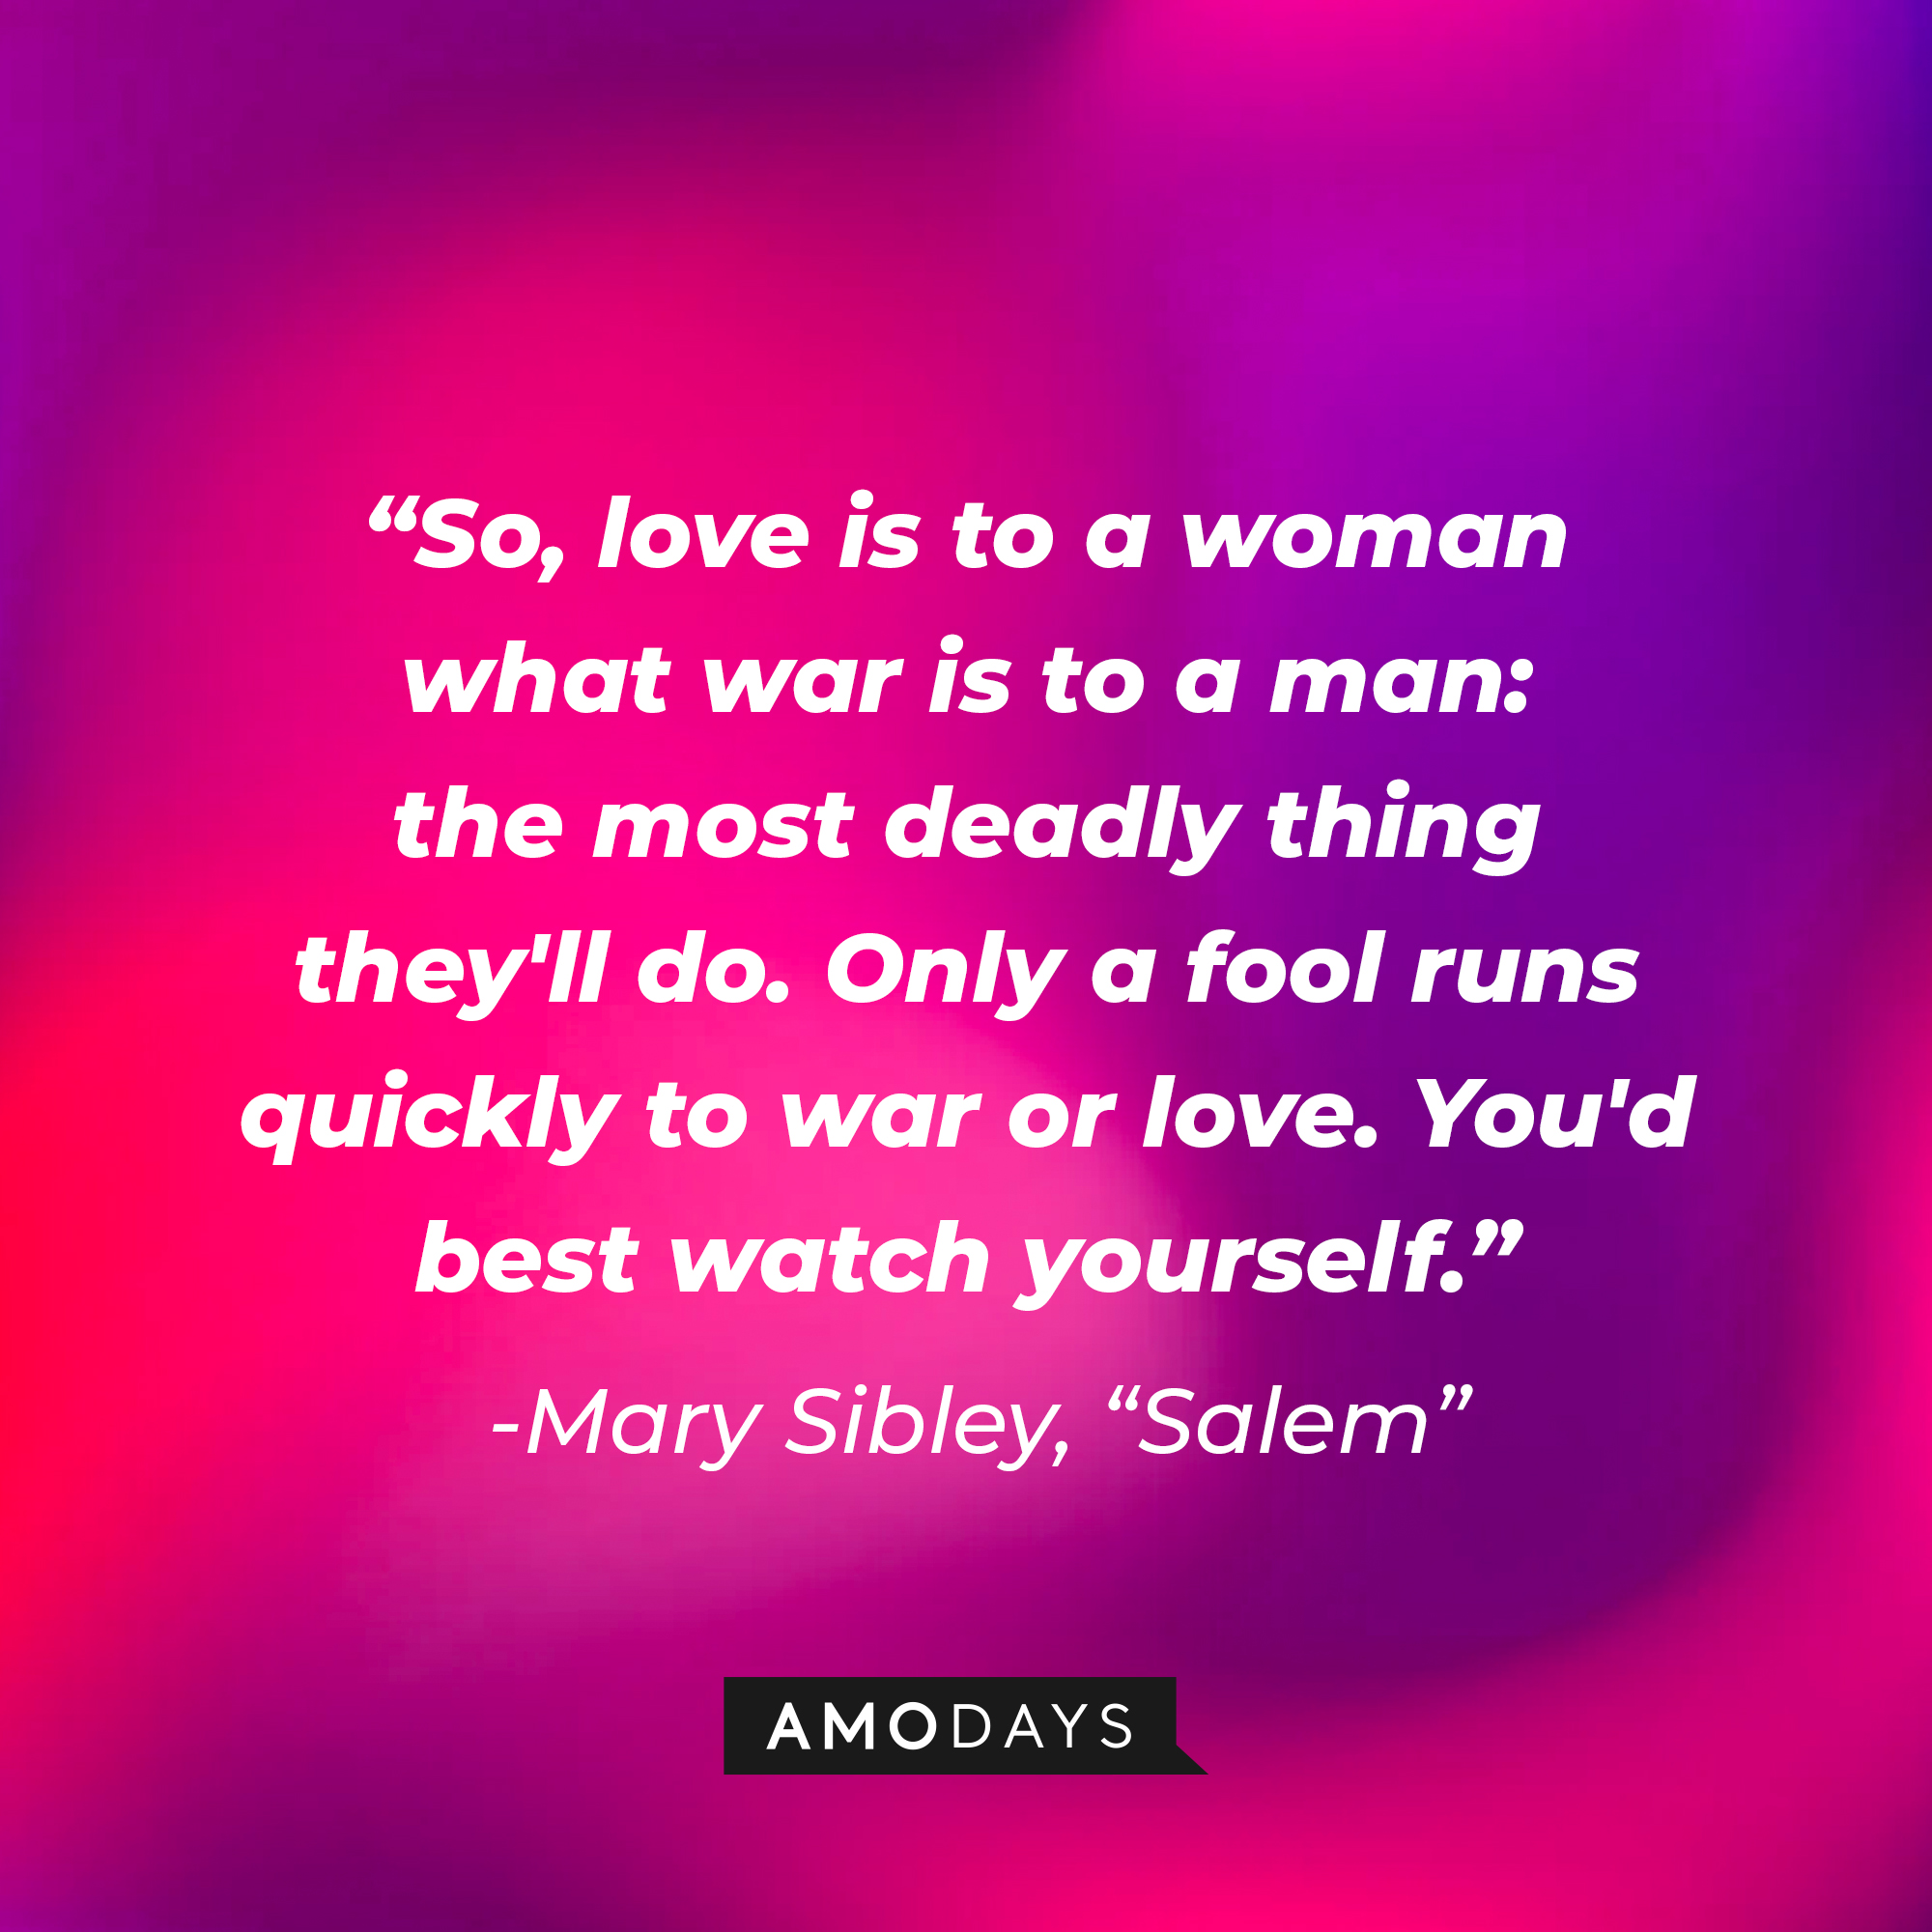 Mary Sibley's quote: "So, love is to a woman what war is to a man: the most deadly thing they'll do. Only a fool runs quickly to war or love. You'd best watch yourself." | Source: Amodays